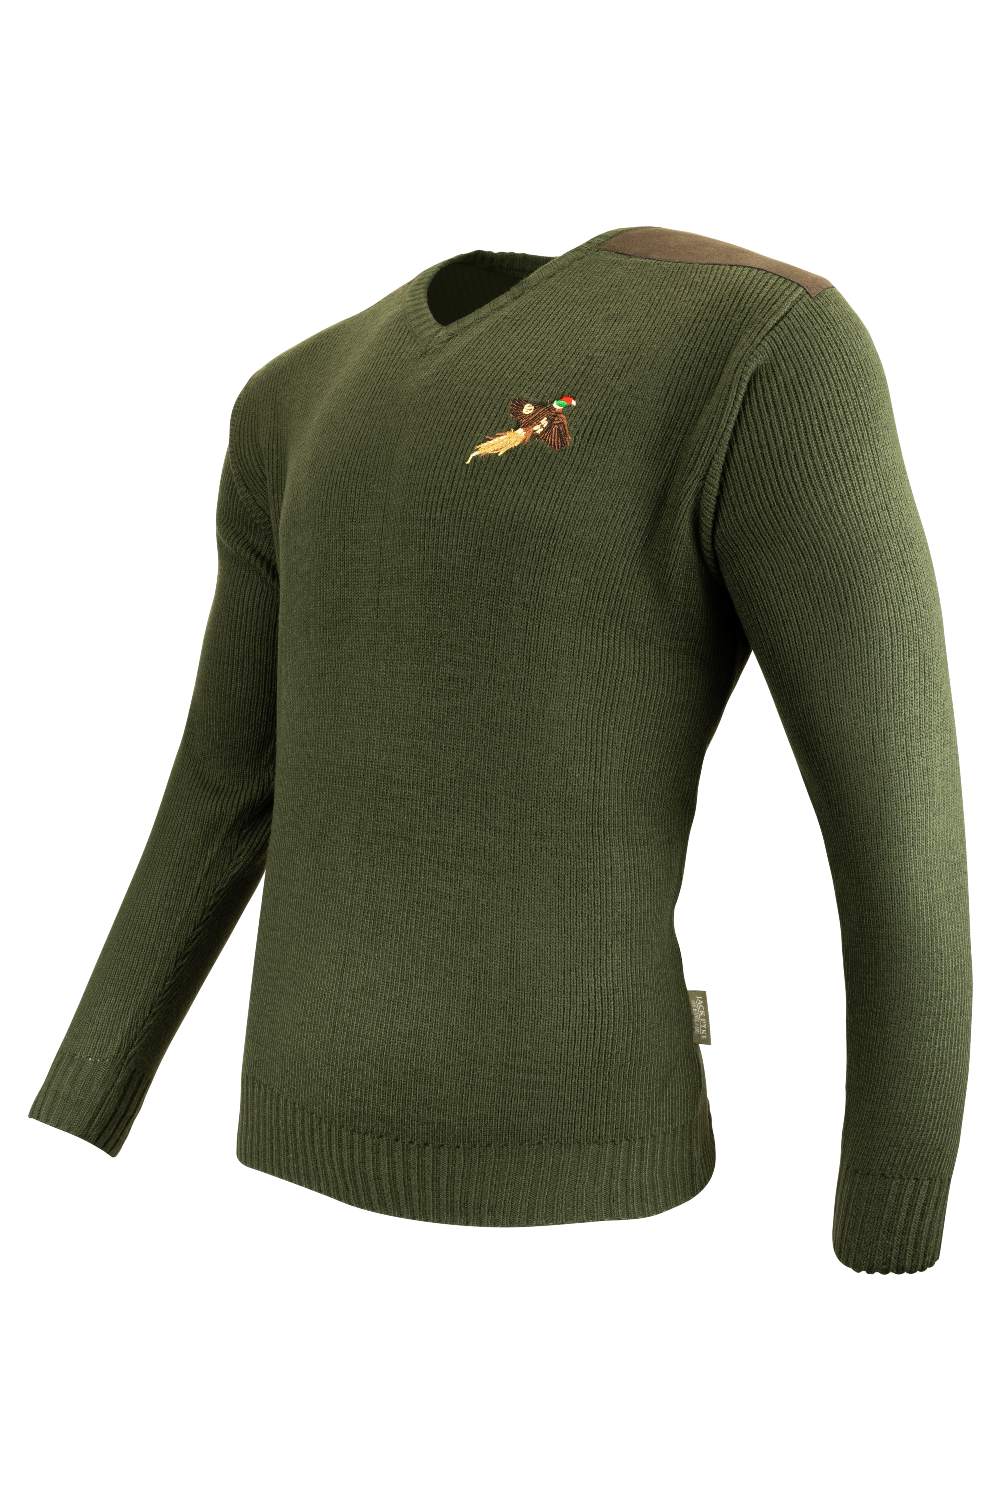 Jack Pyke Shooters Pullover in Green